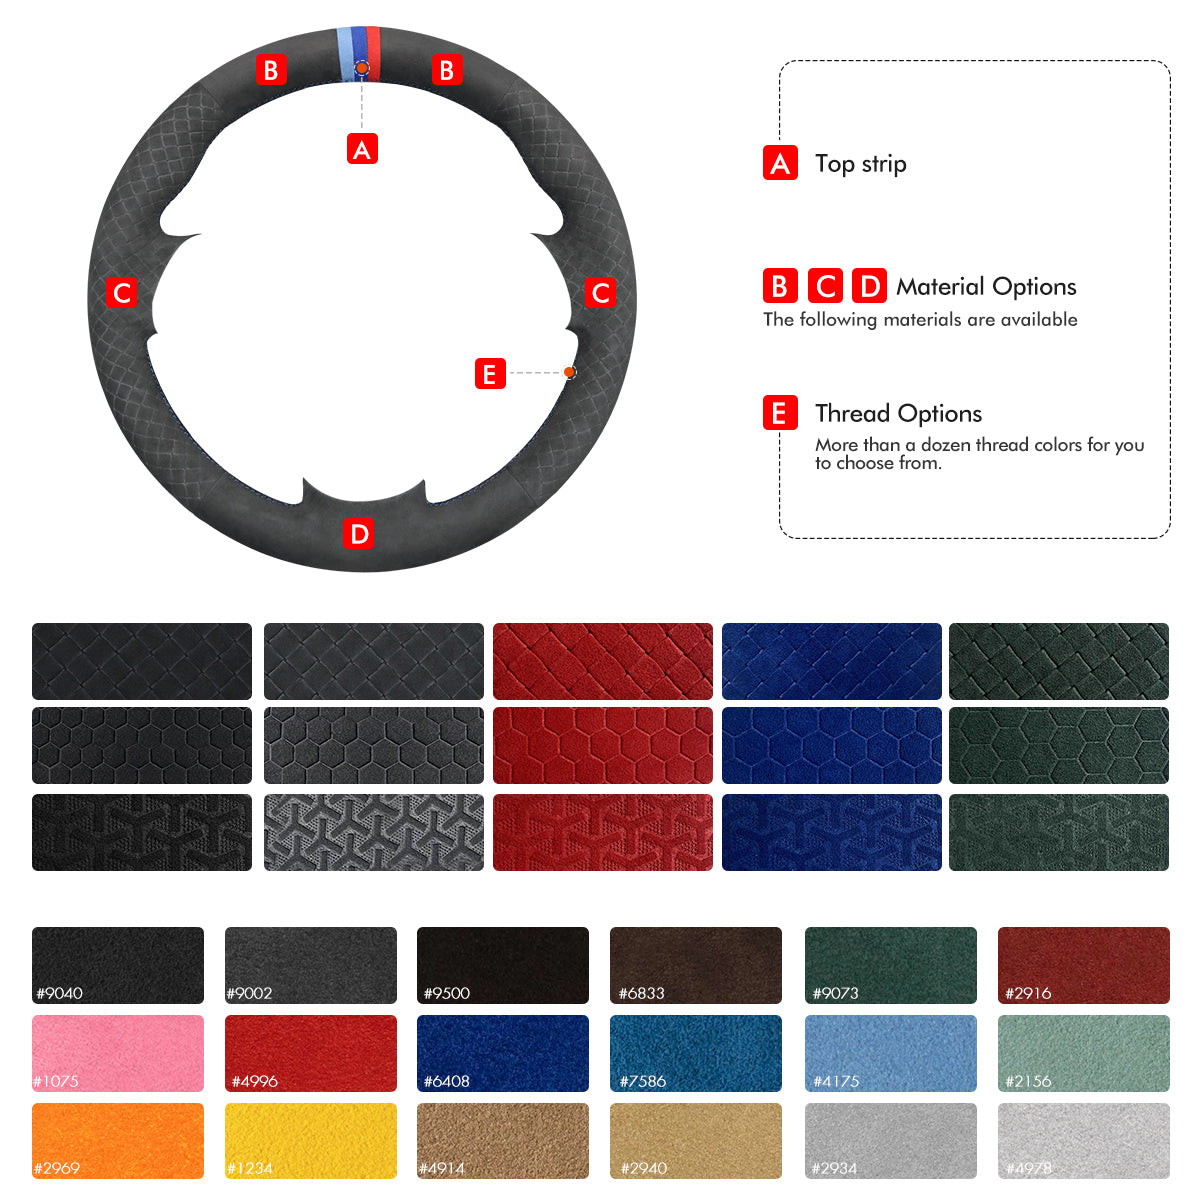 MEWANT Car Steering Wheel Cover for Ford Focus / Escape / C-MAX / Grand C-Max /Kuga /Ford Focus III